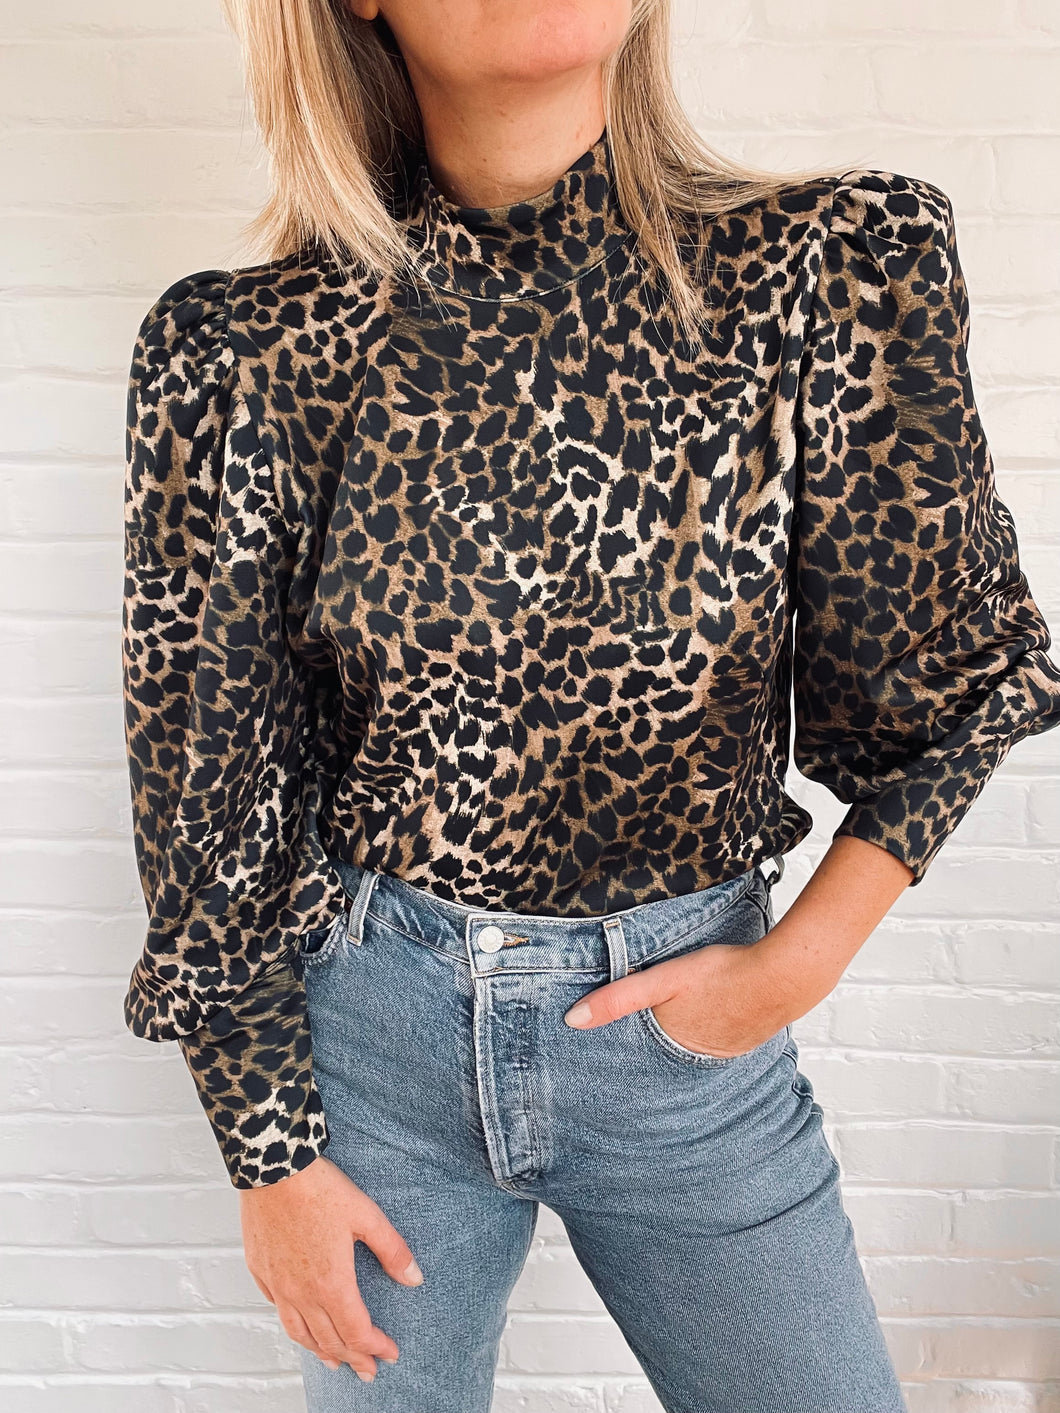 The Aude Top in Leopard